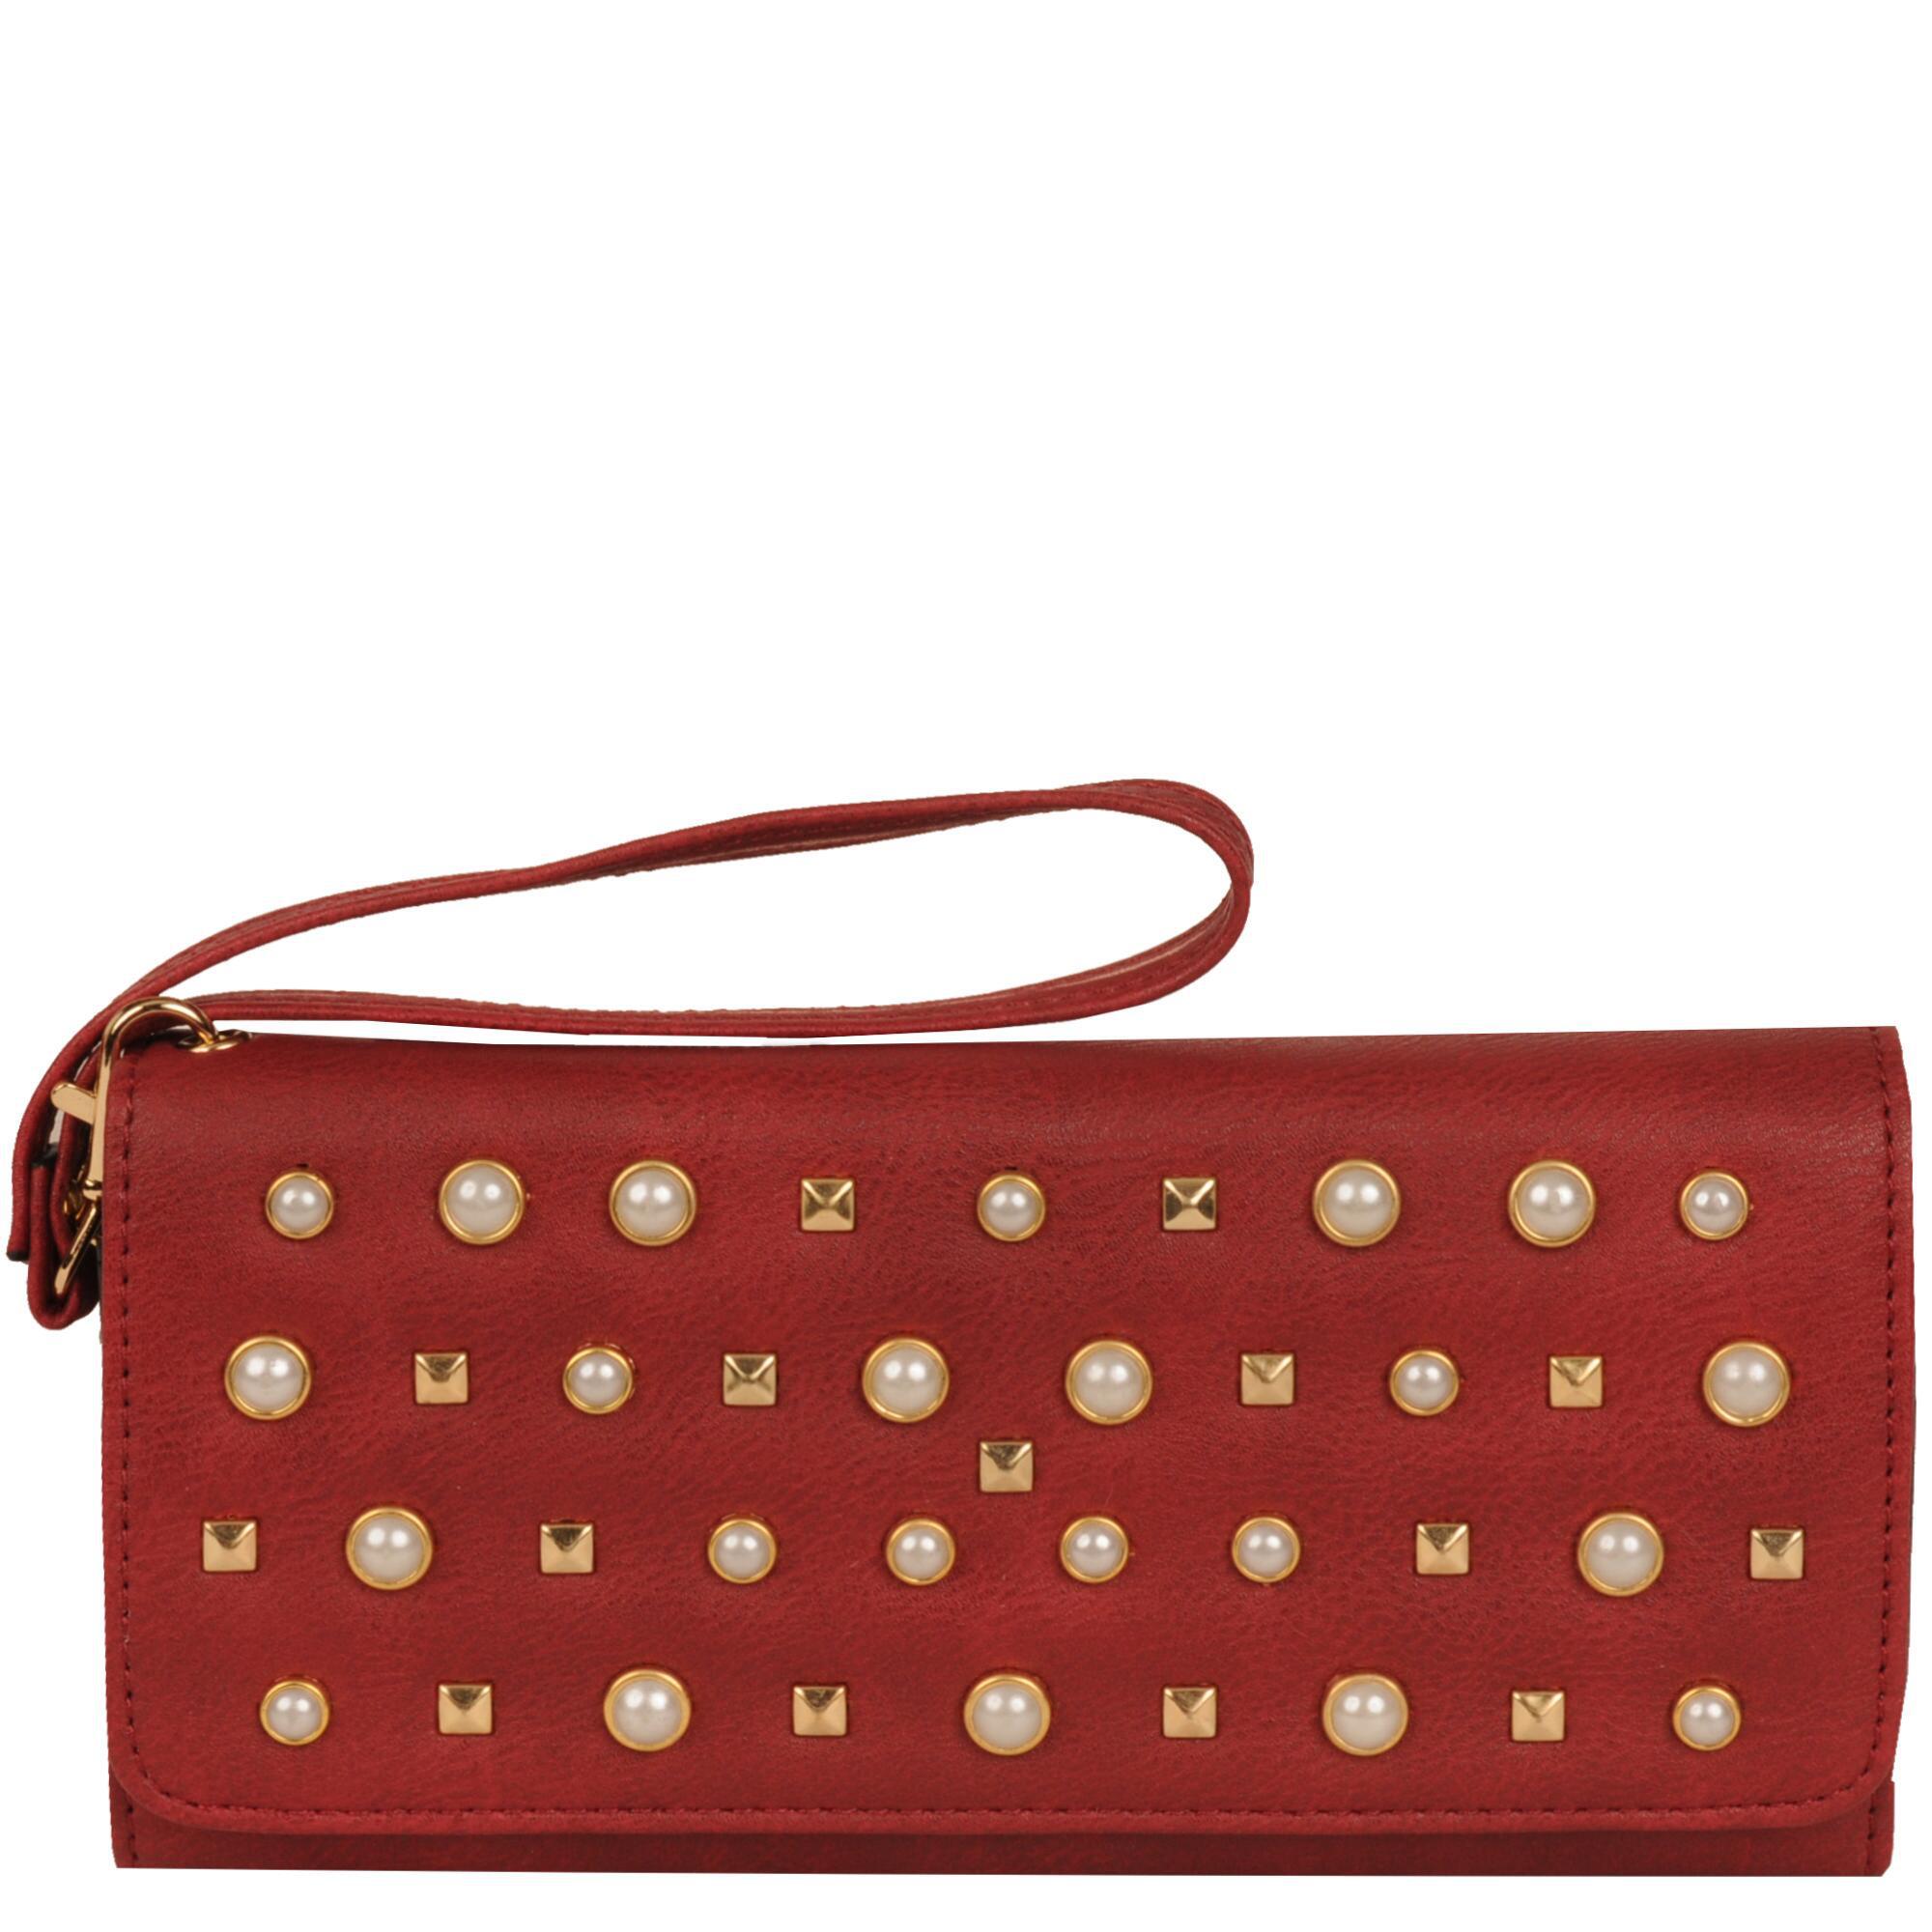 Wilsons Leather Marc New York Stud Pearl Faux-leather Wallet in Red - Lyst